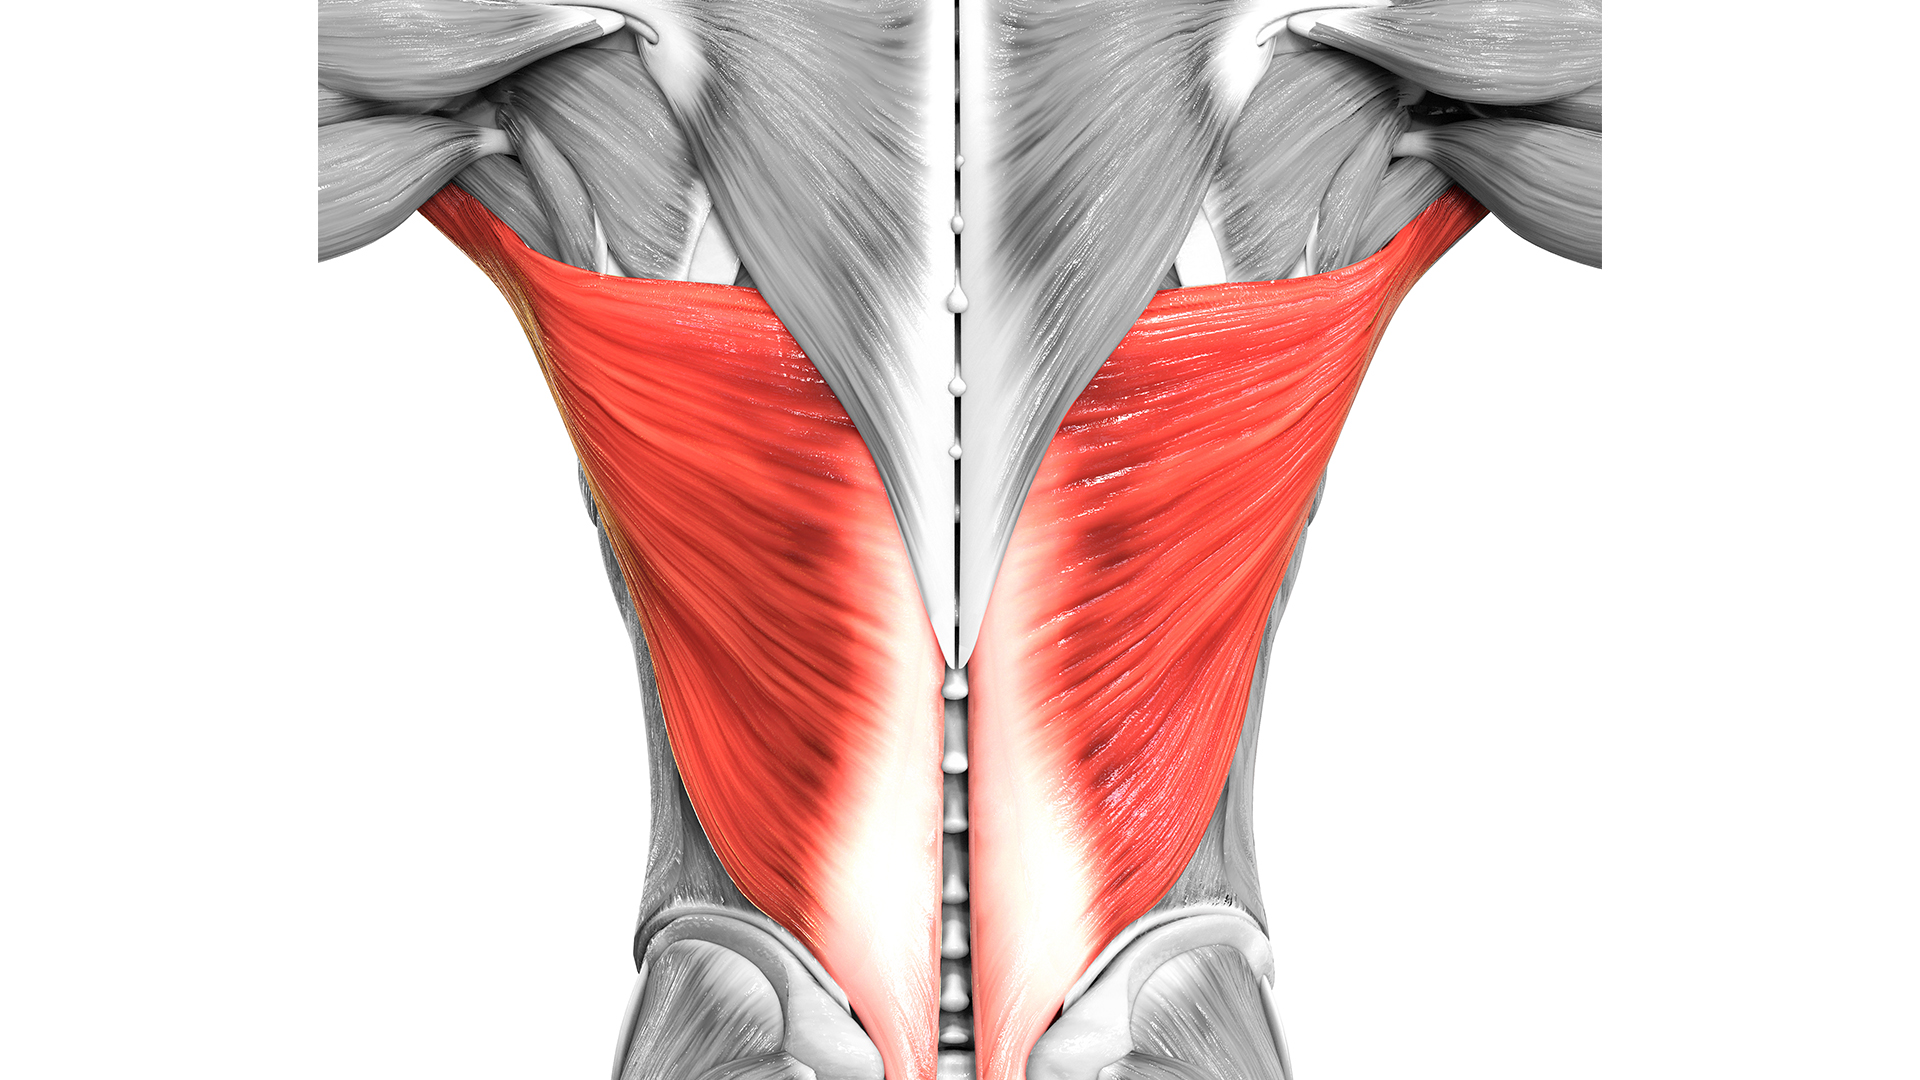 Human back muscles are shown in black and white, with only the latissimus dorsi major in red